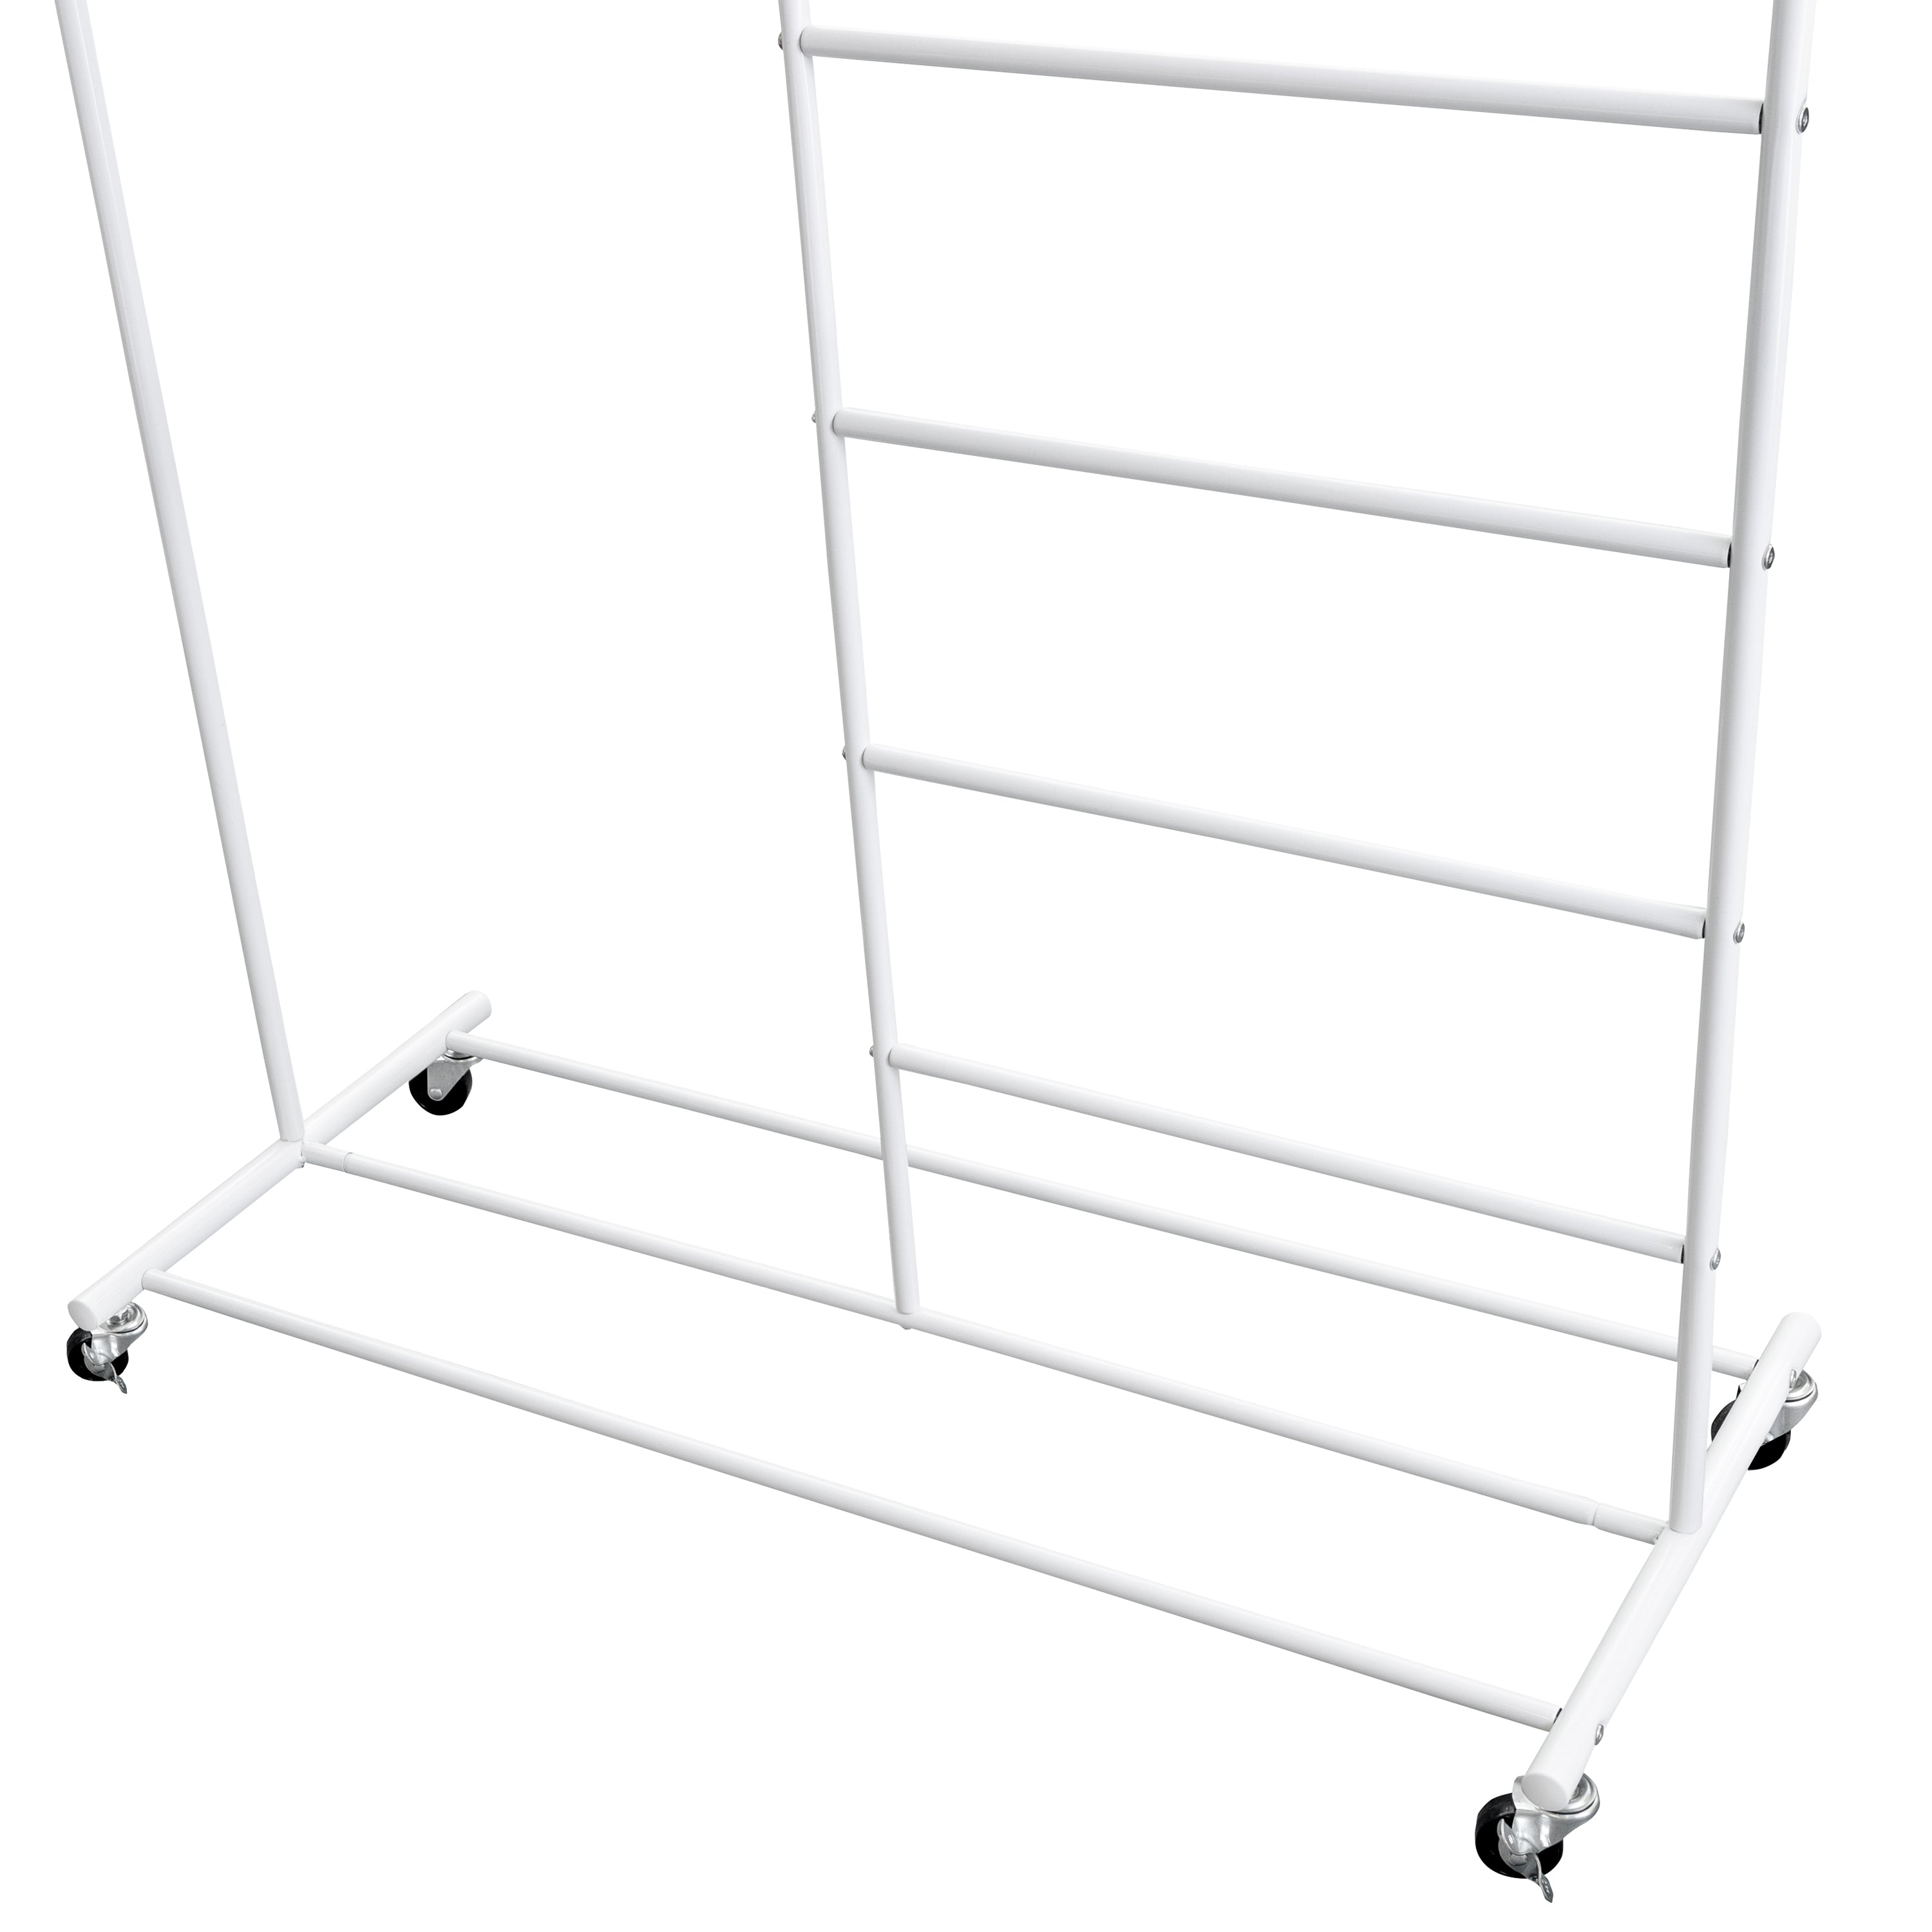 Honey-Can-Do 22 in. x 58 in. White Steel Portable Clothes Drying Rack with  A-Frame Design DRY-08551 - The Home Depot